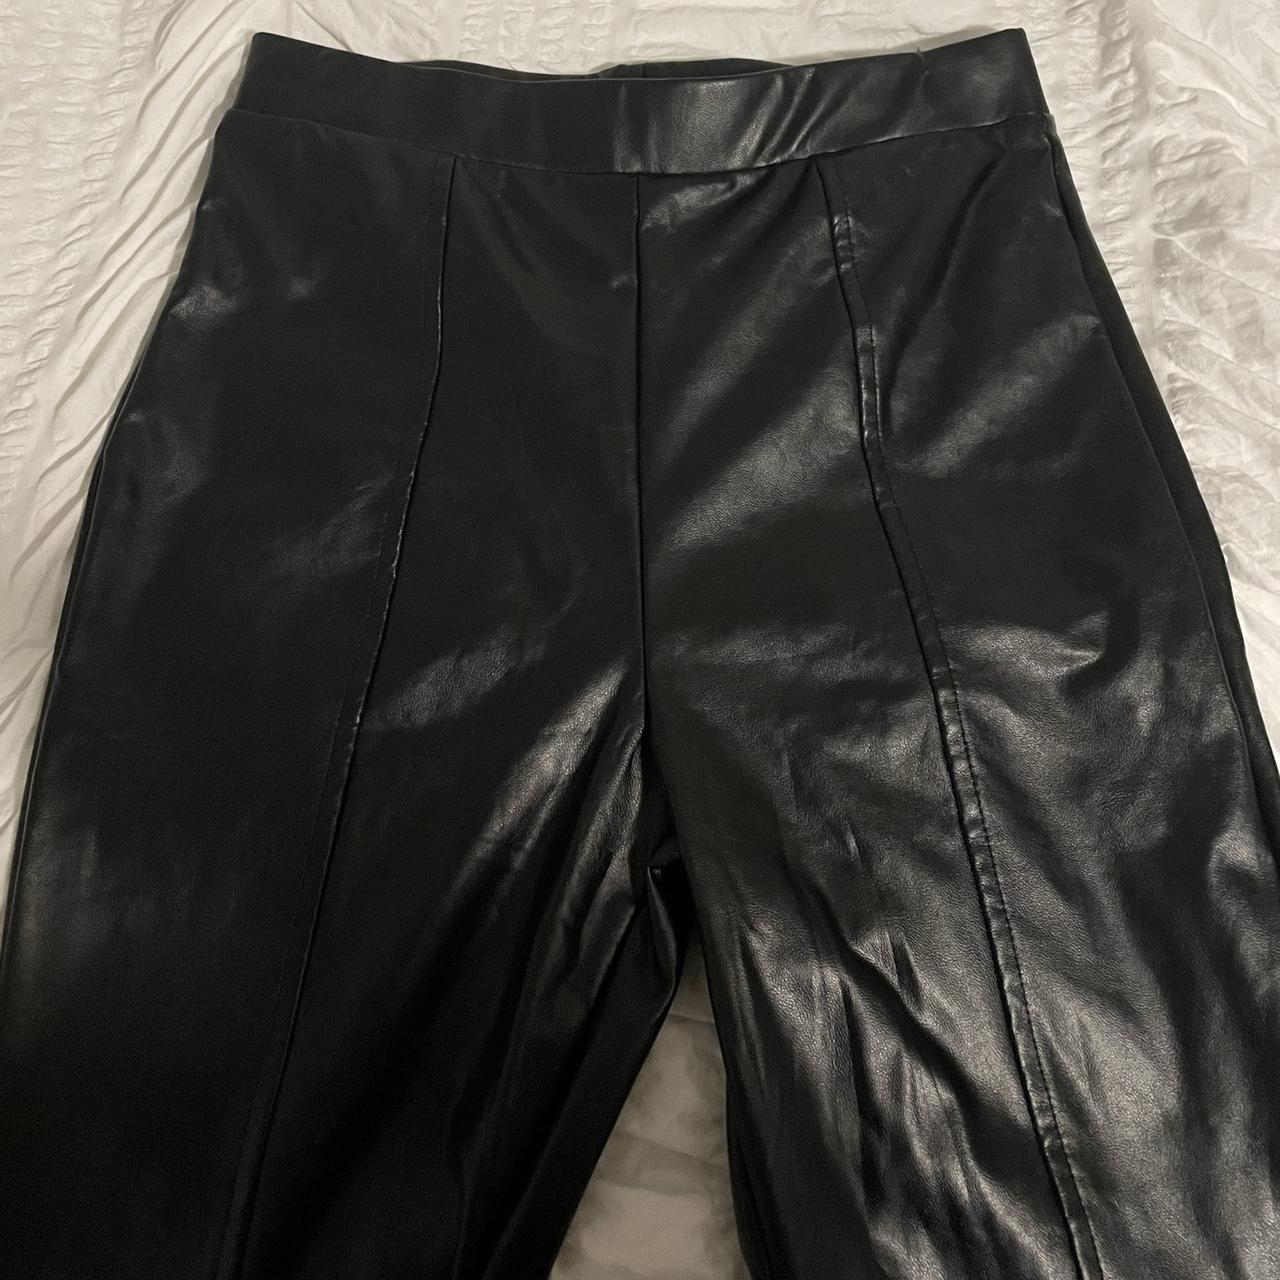 Wild fable leather pants Straight leg with ankle... - Depop